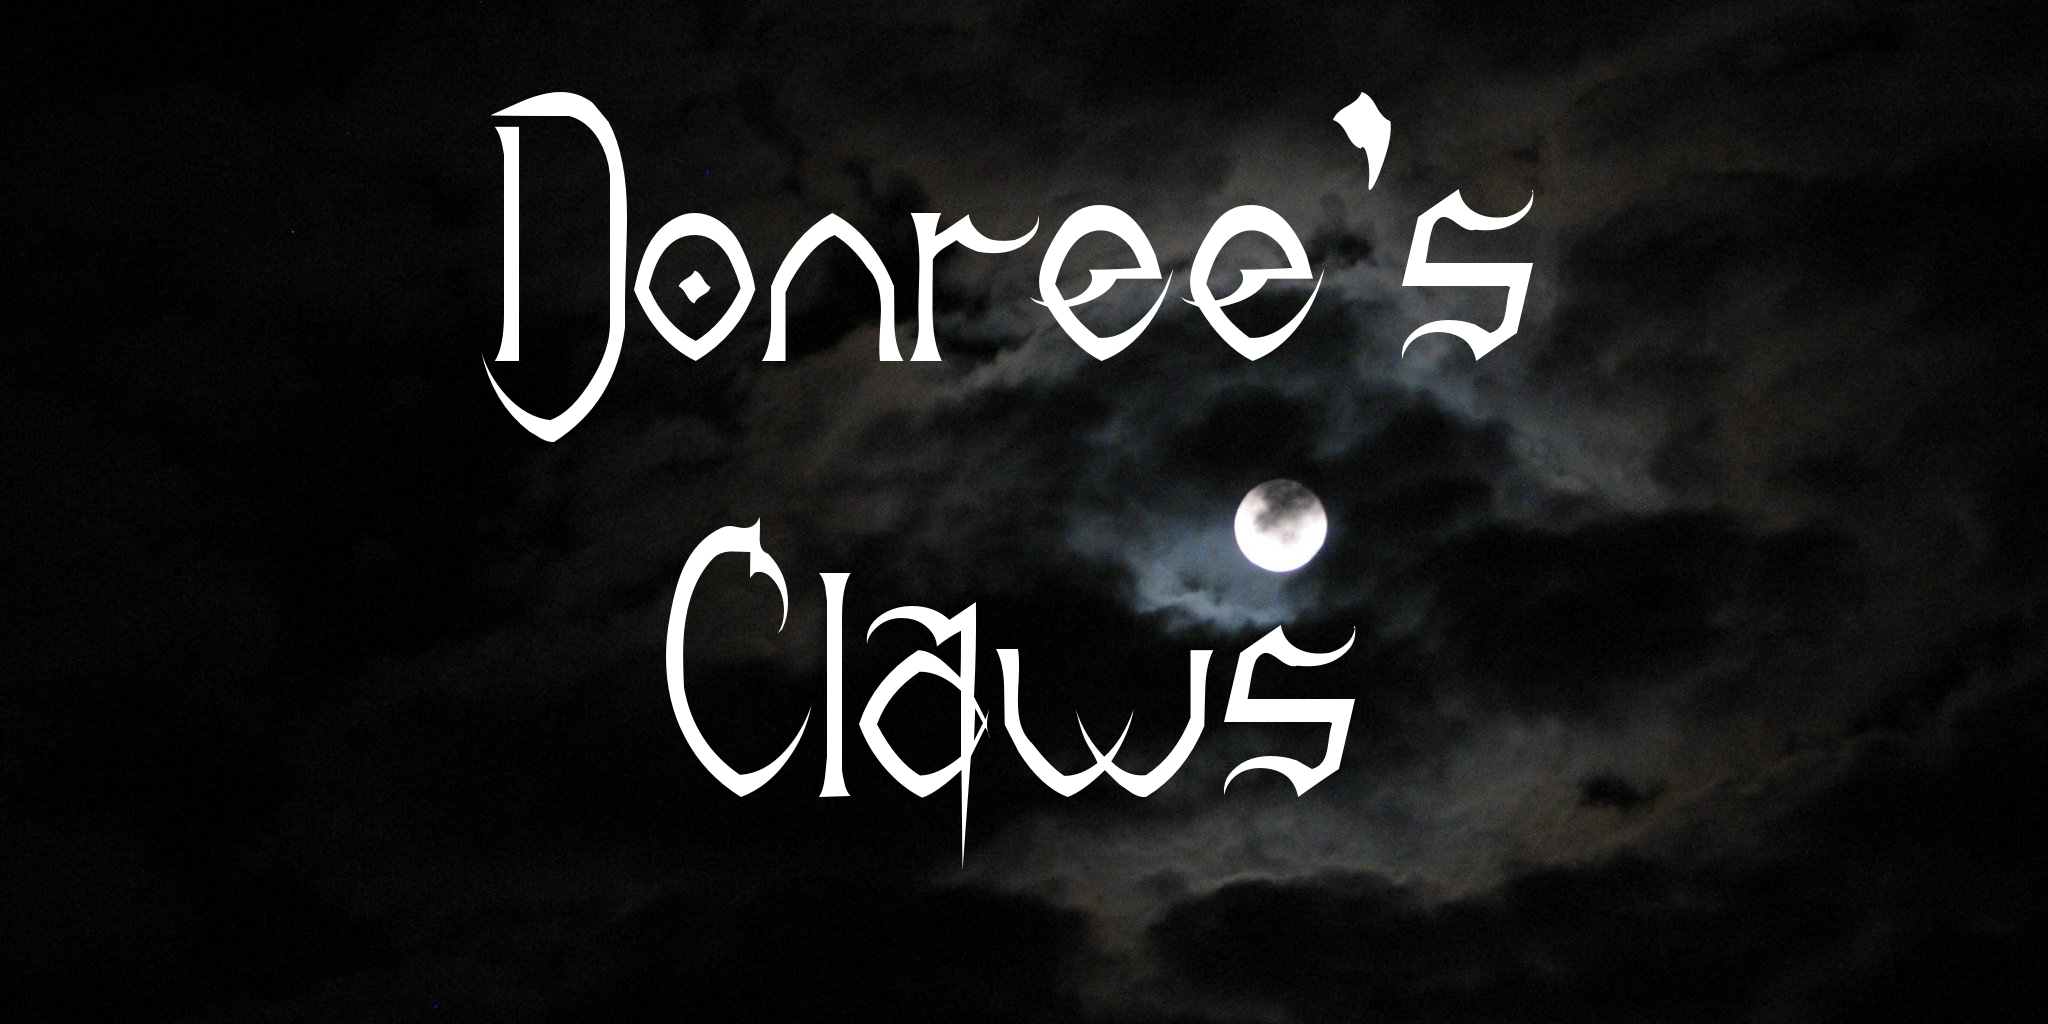 Donree's Claws